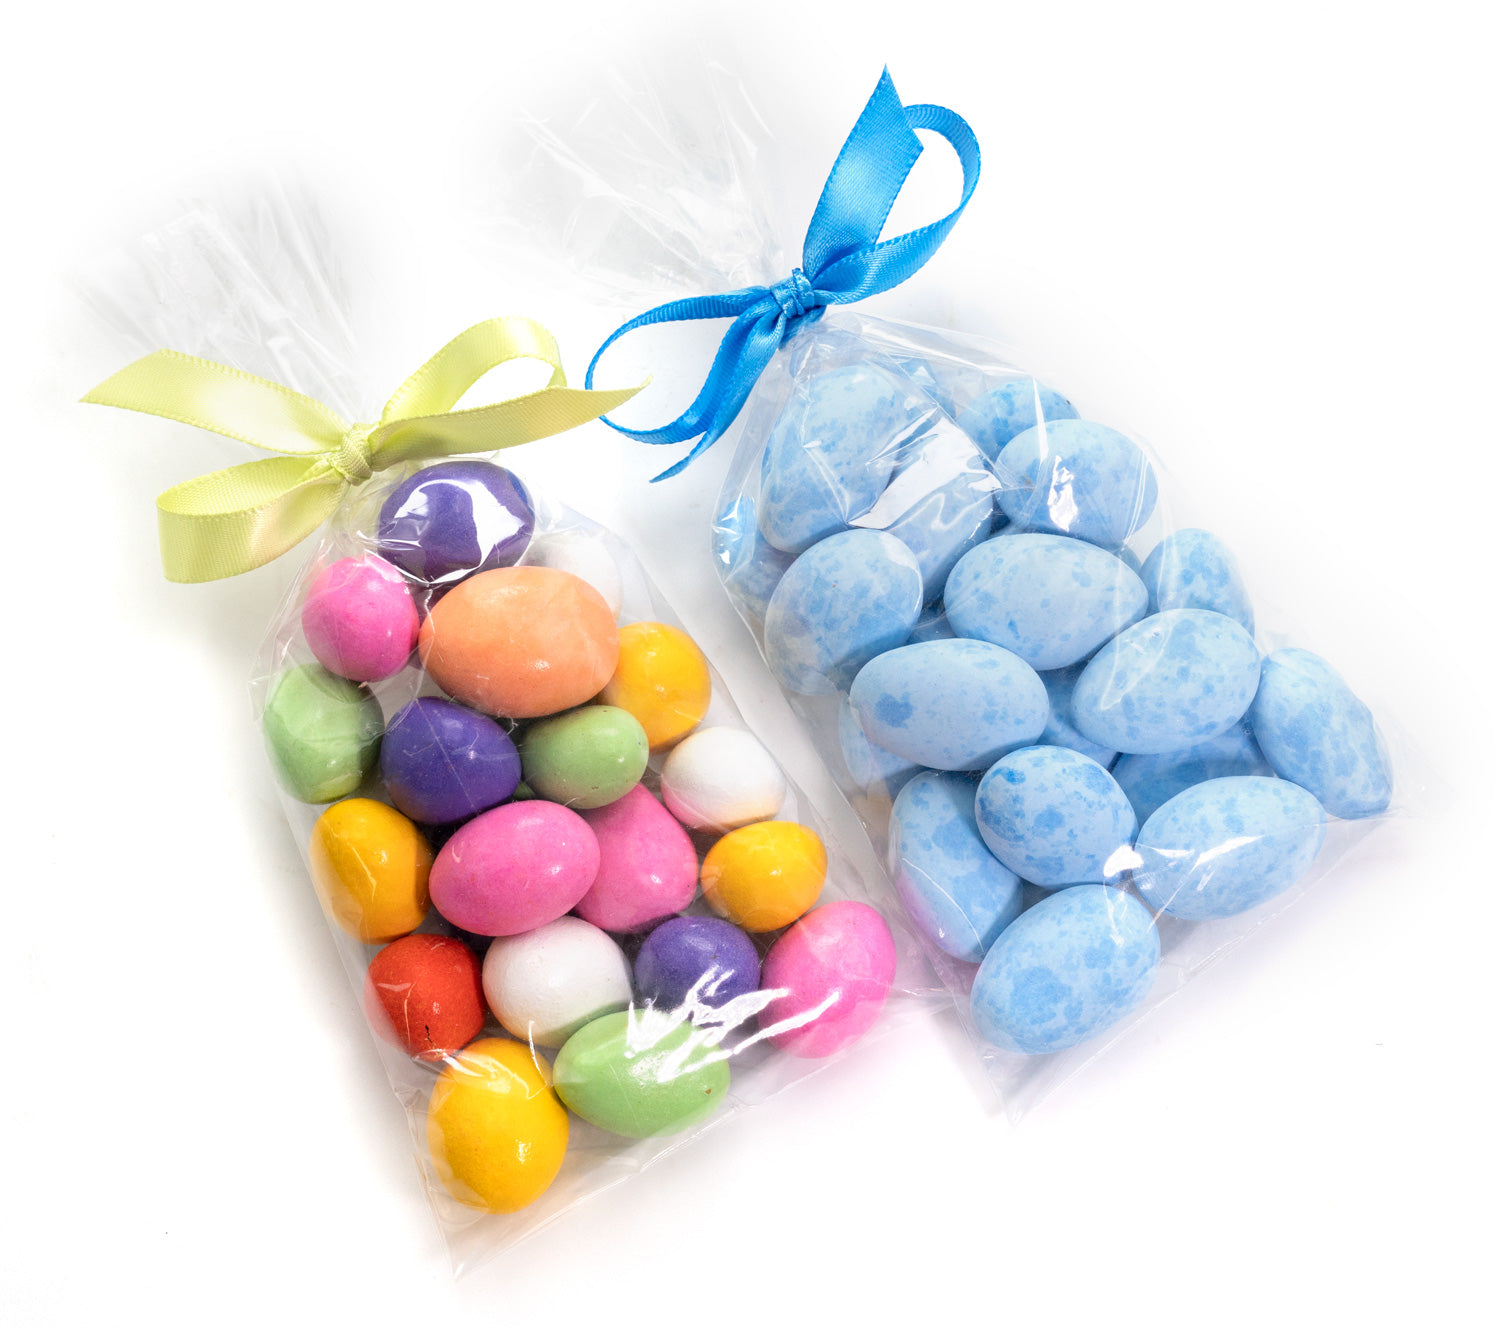 Candy robin's eggs and fruit cordials